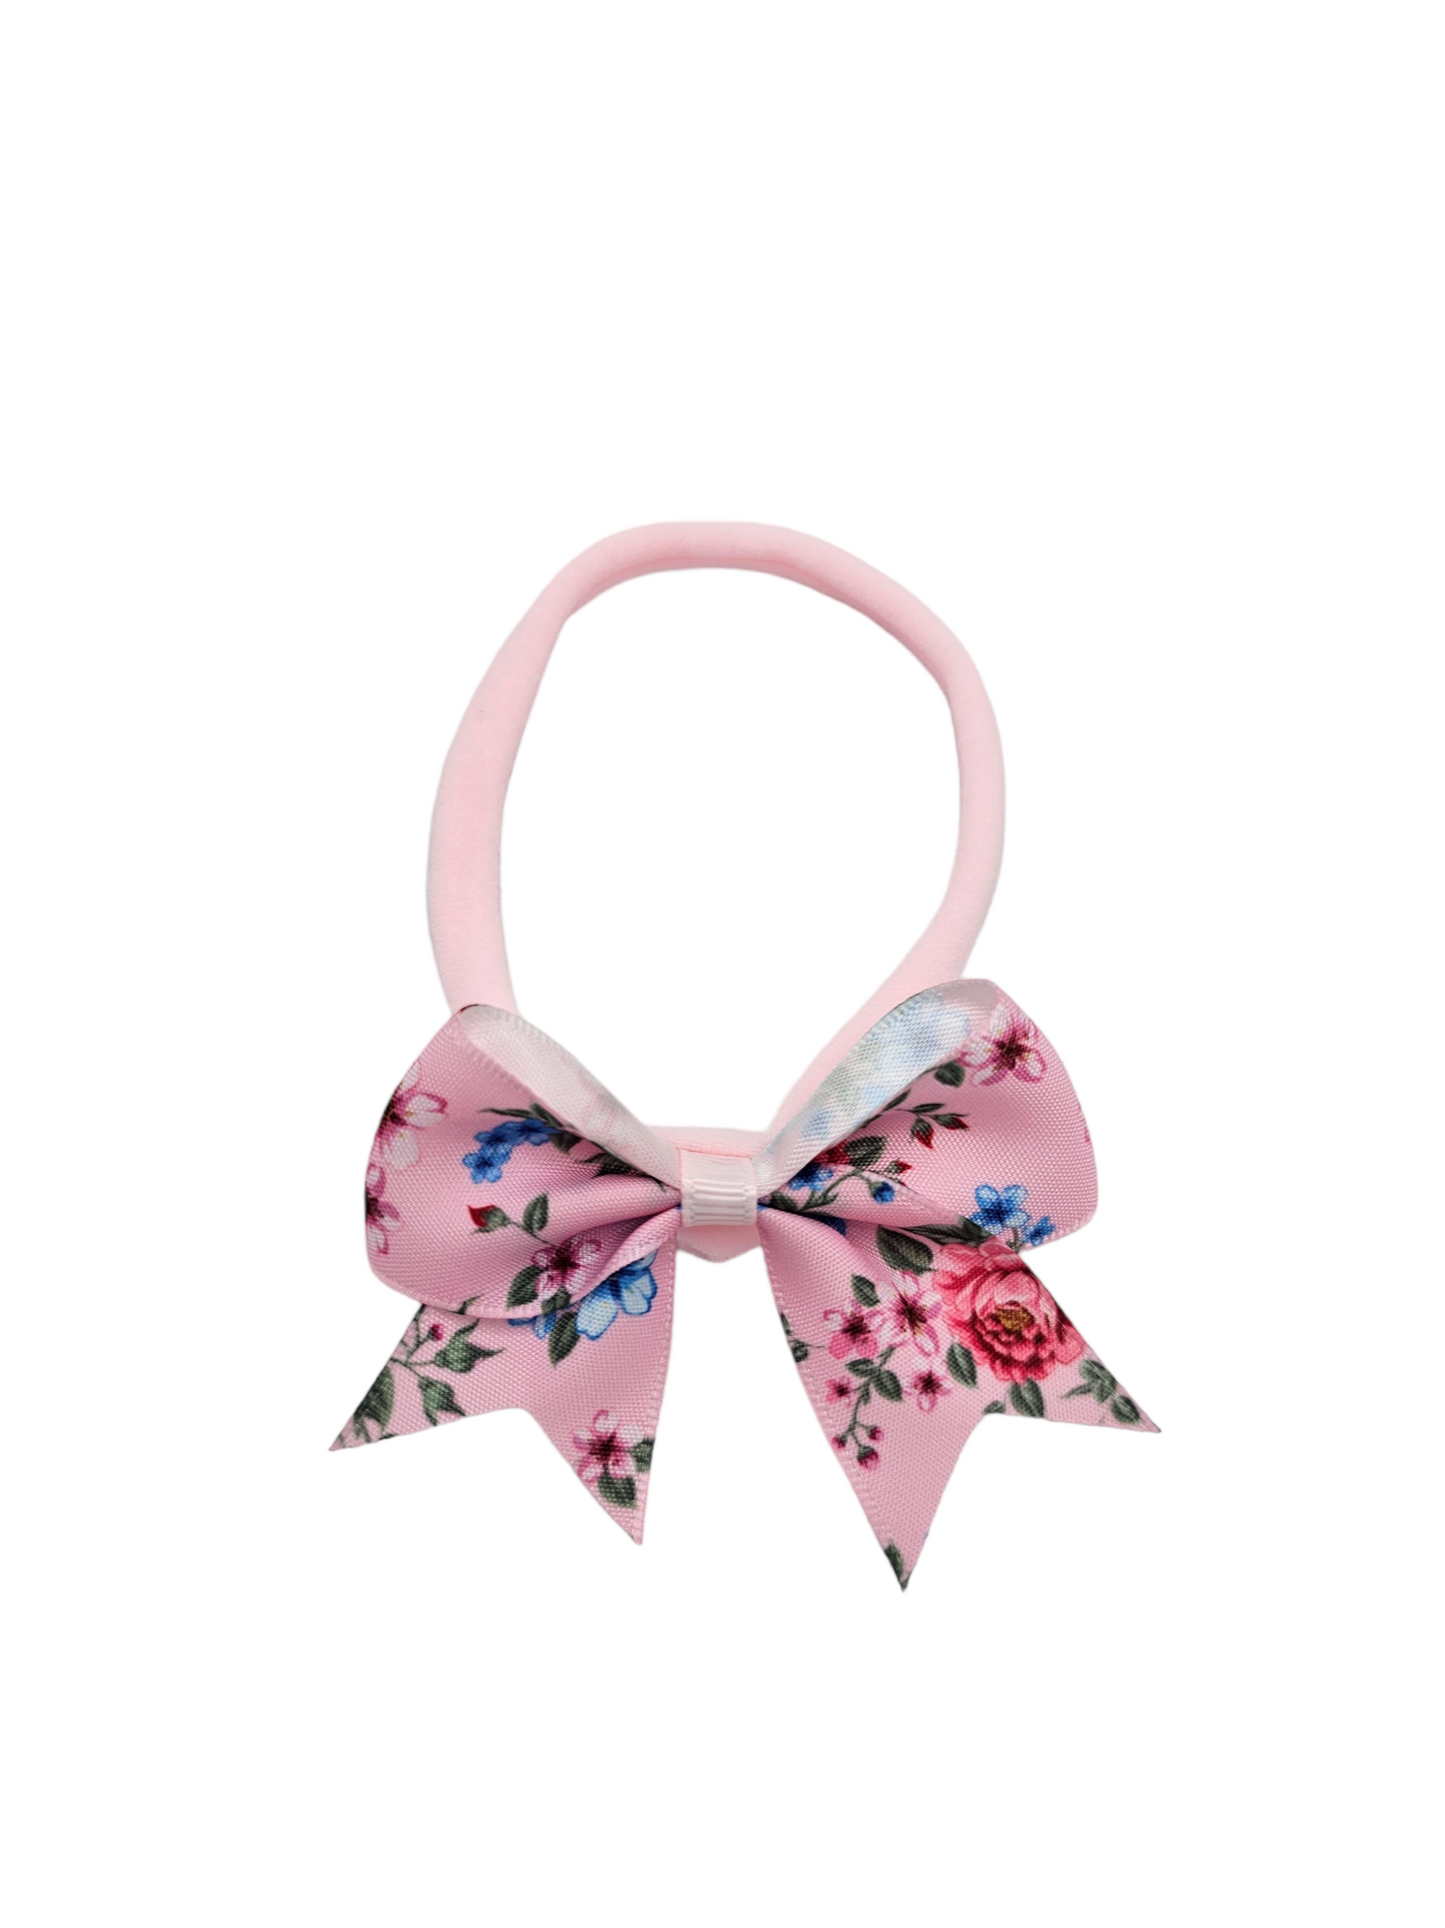 2.5 Inch Light Pink Floral Kiss Dainty Bow on Headband - Betty Brown Boutique Ltd